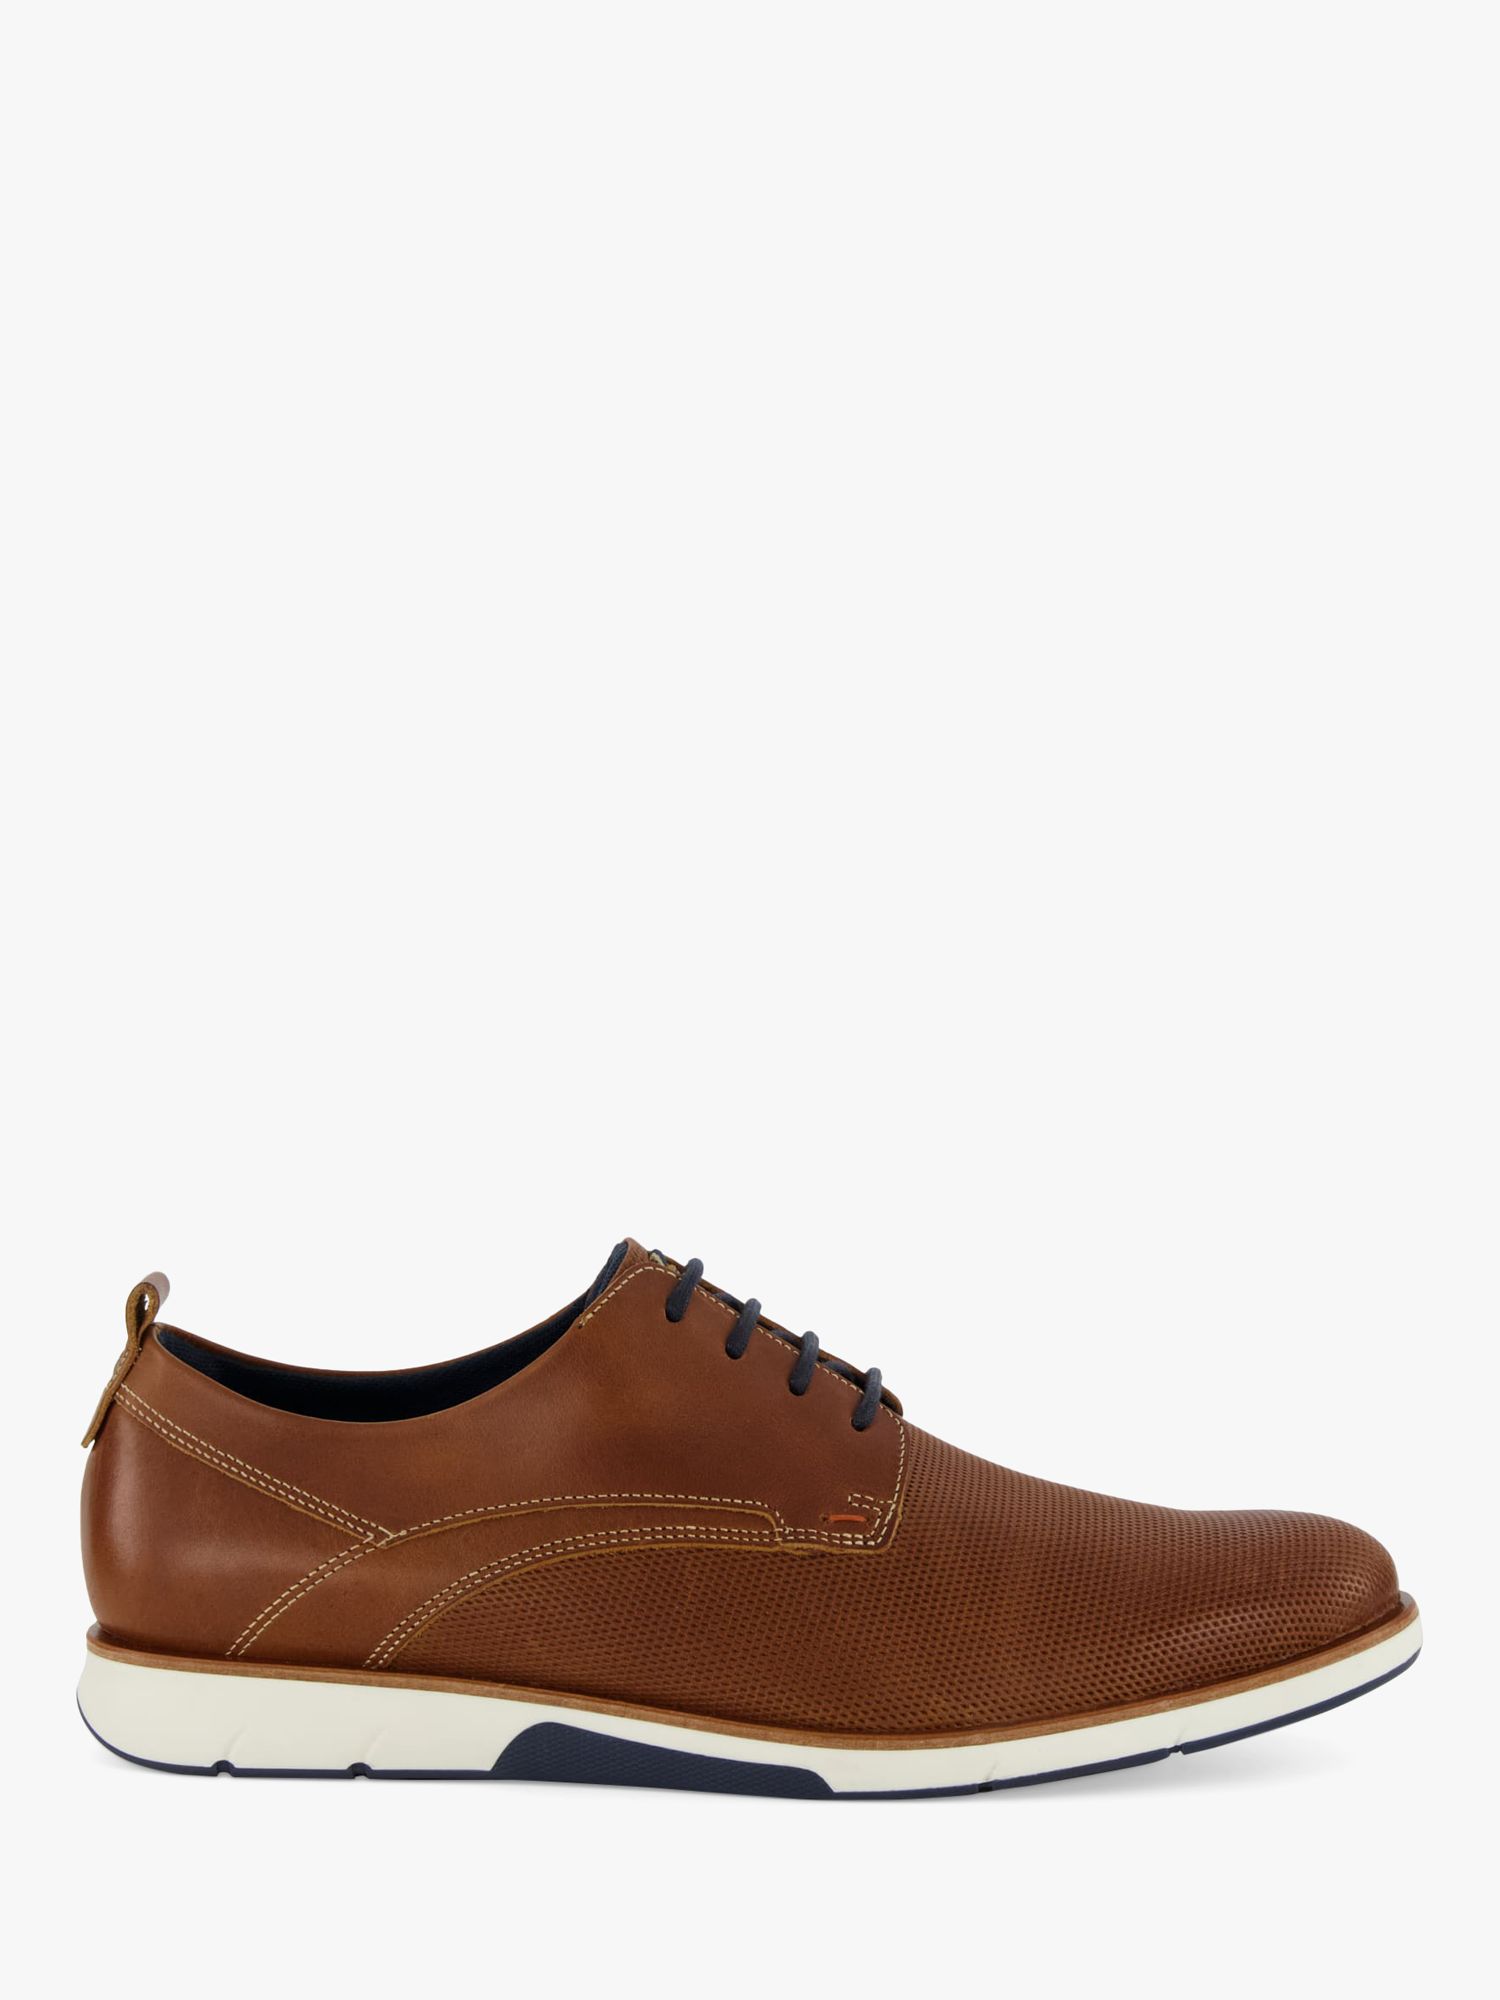 Buy Dune Barnabey Plain Wedge Leather Shoes, Tan Online at johnlewis.com